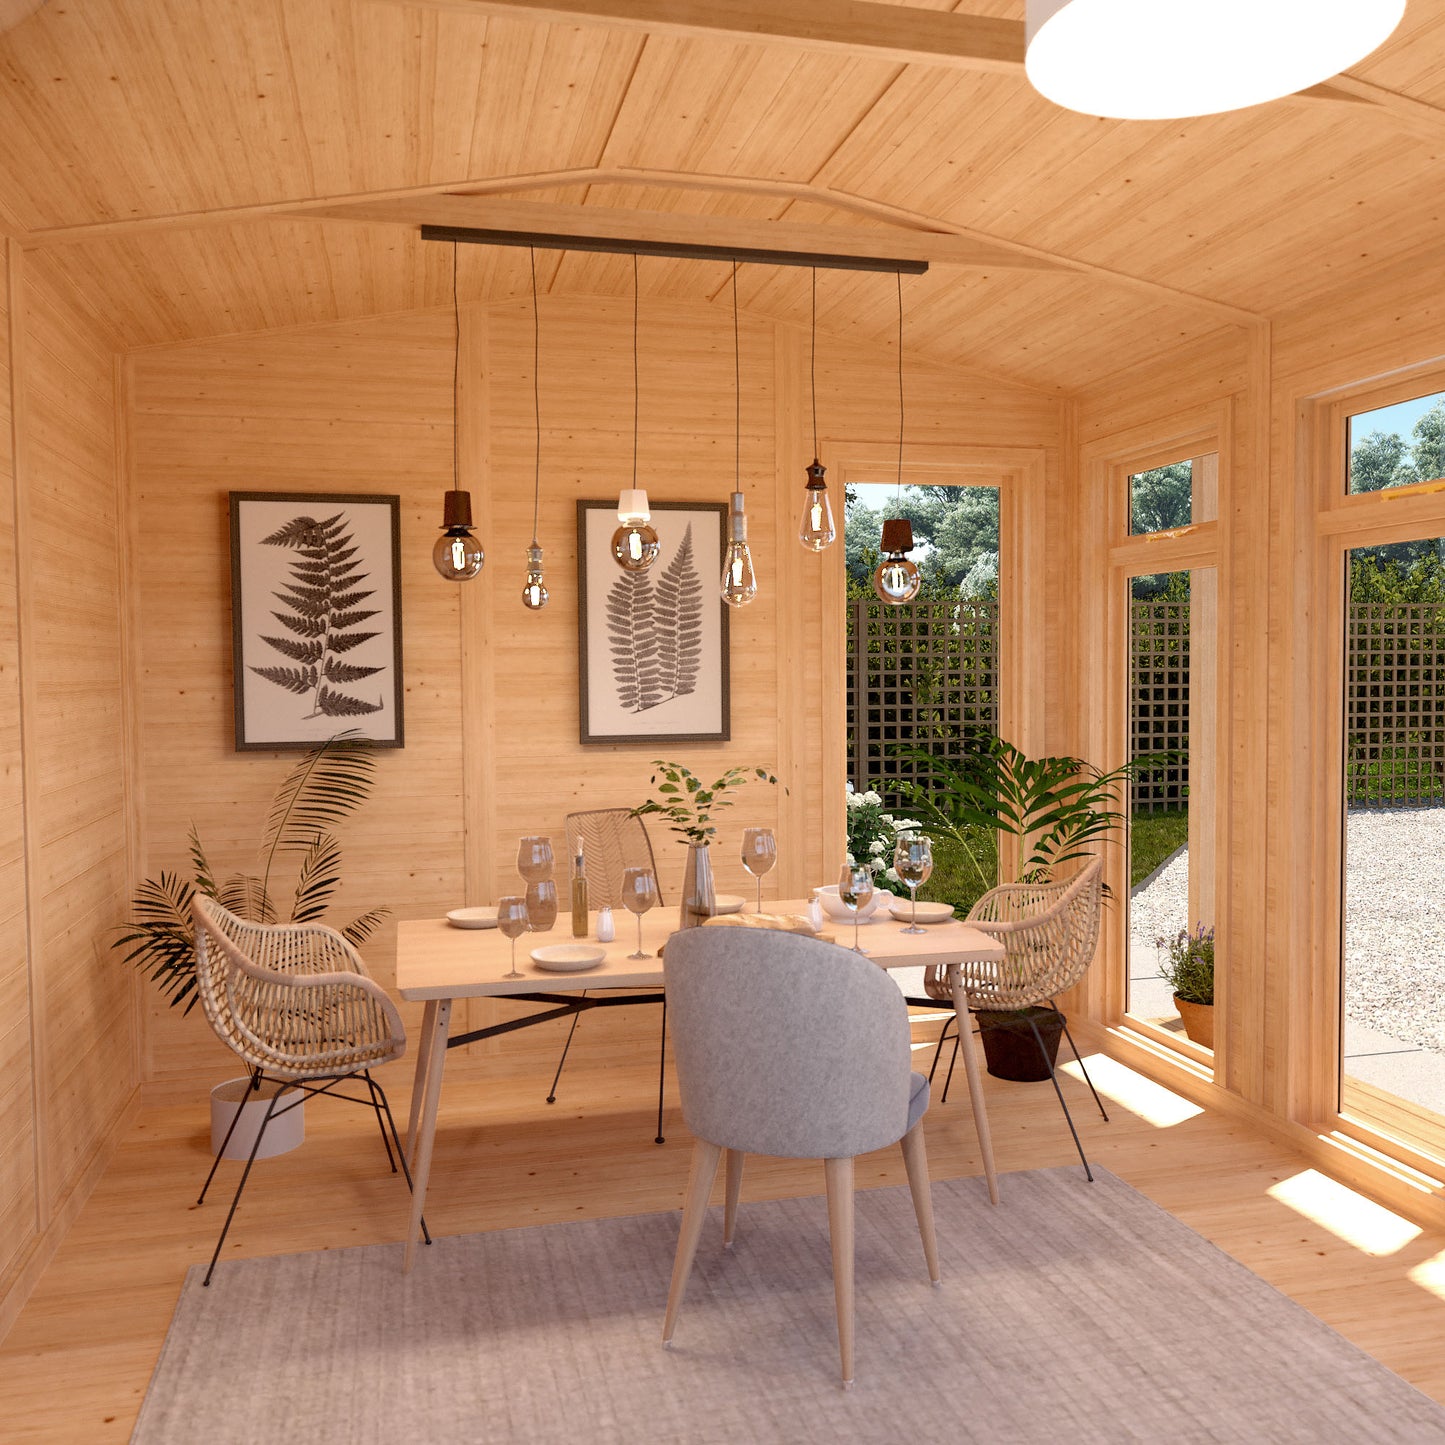 The Thoresby 4m x 3m Premium Insulated Garden Room